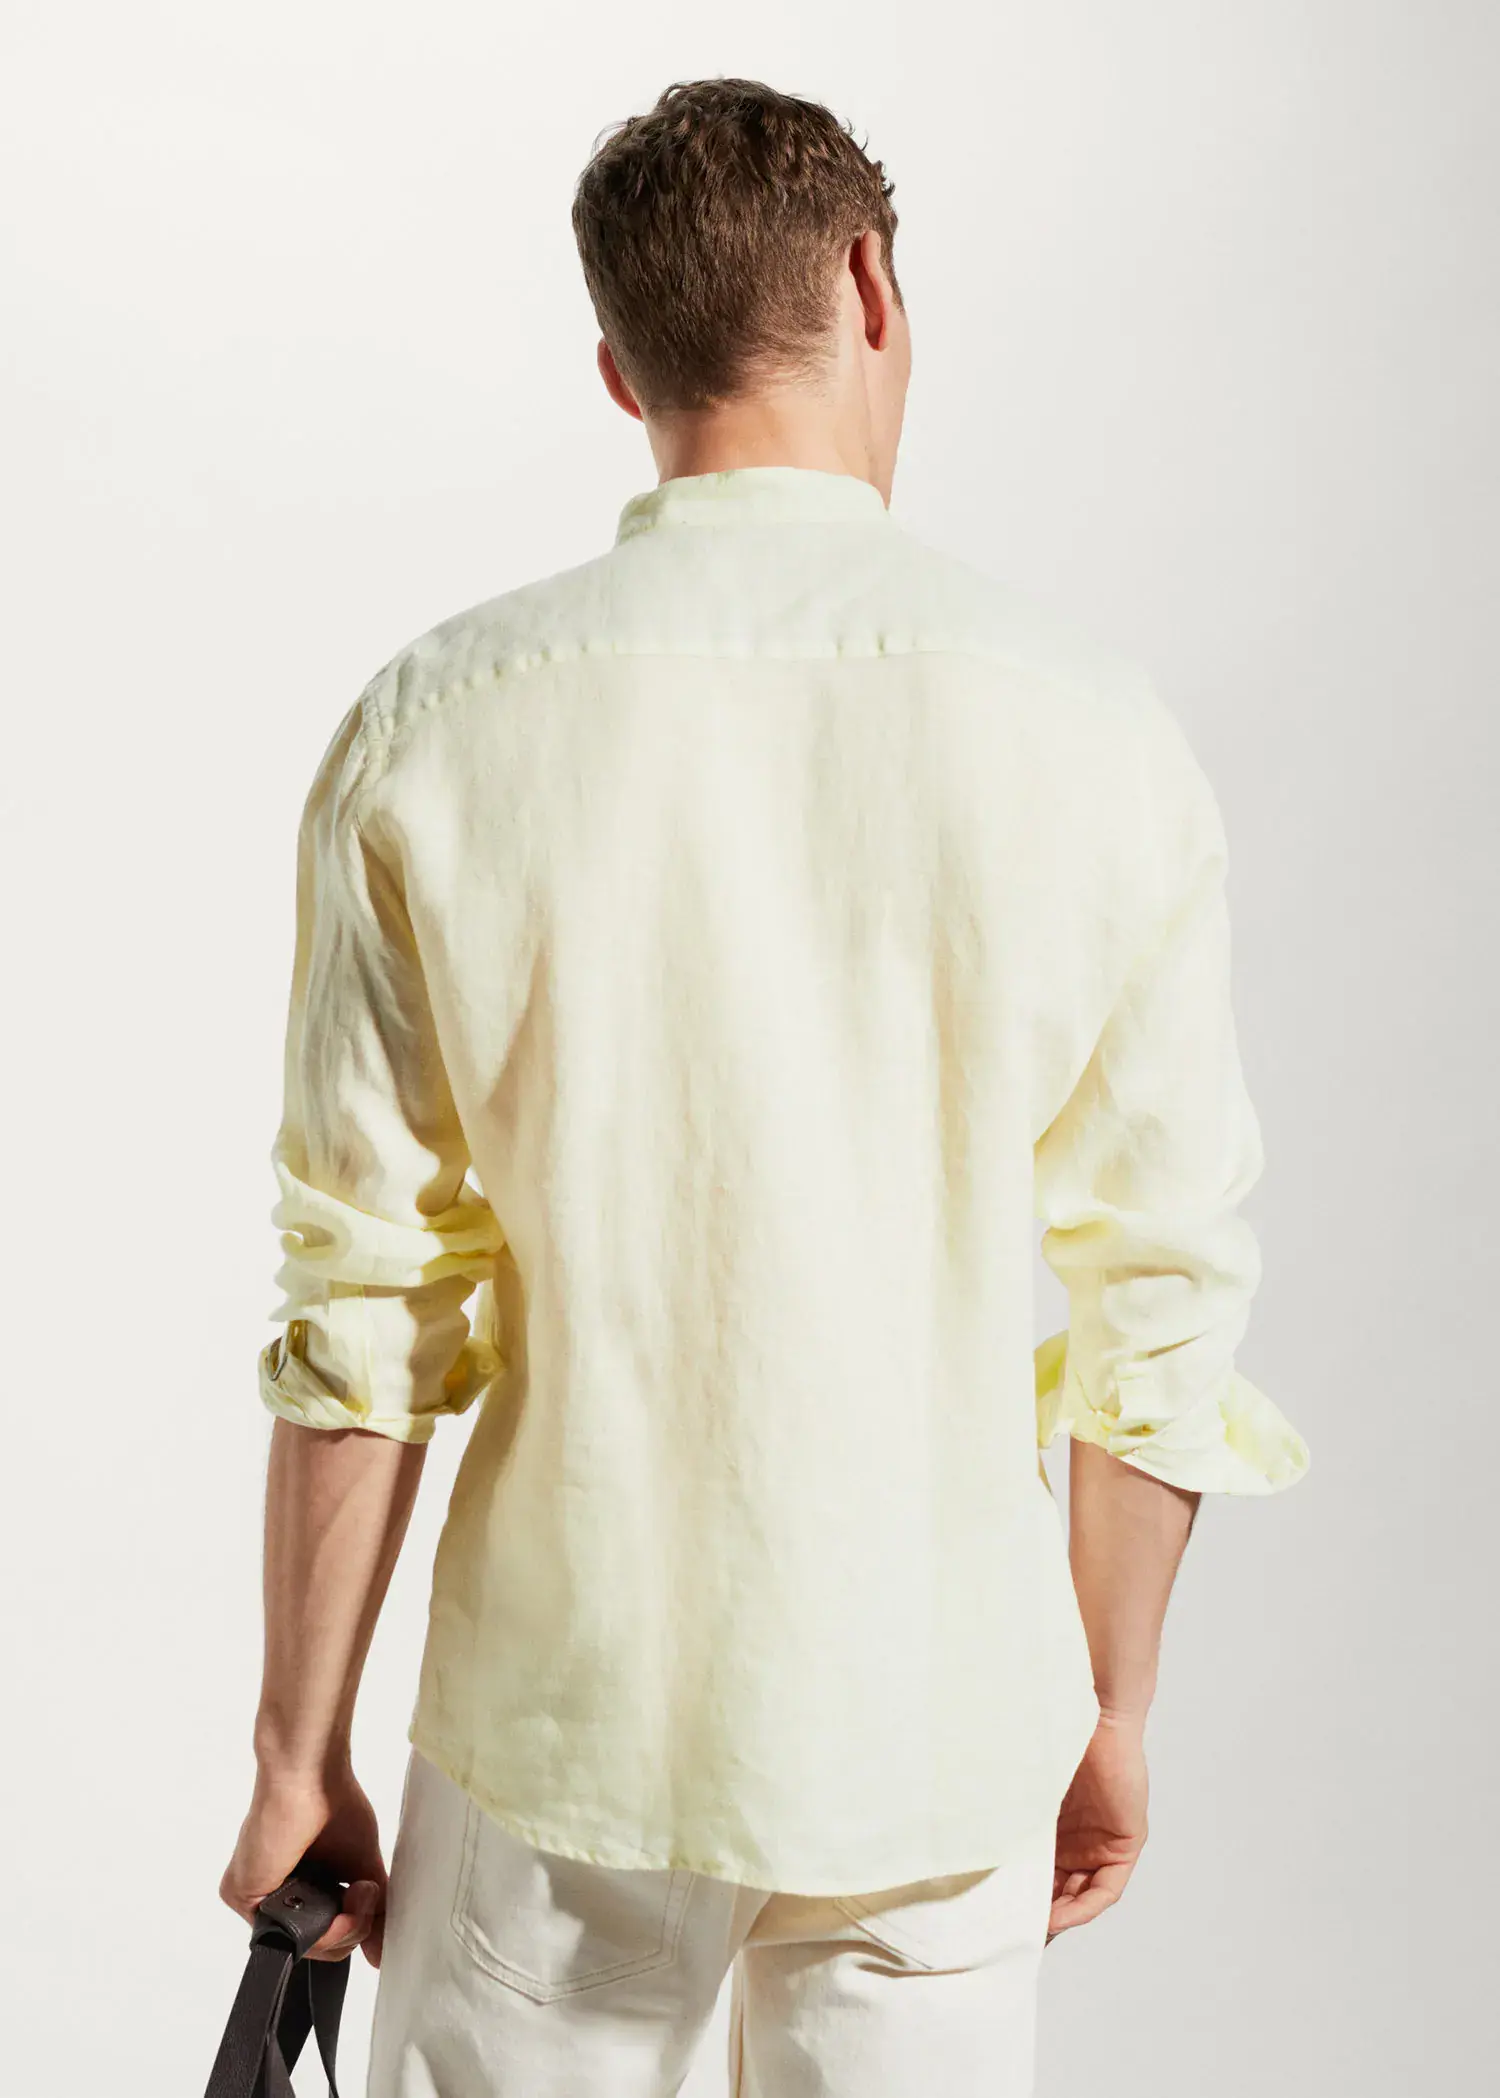 Mango 100% linen Mao collar shirt. a man in a white shirt is standing in front of a white wall. 